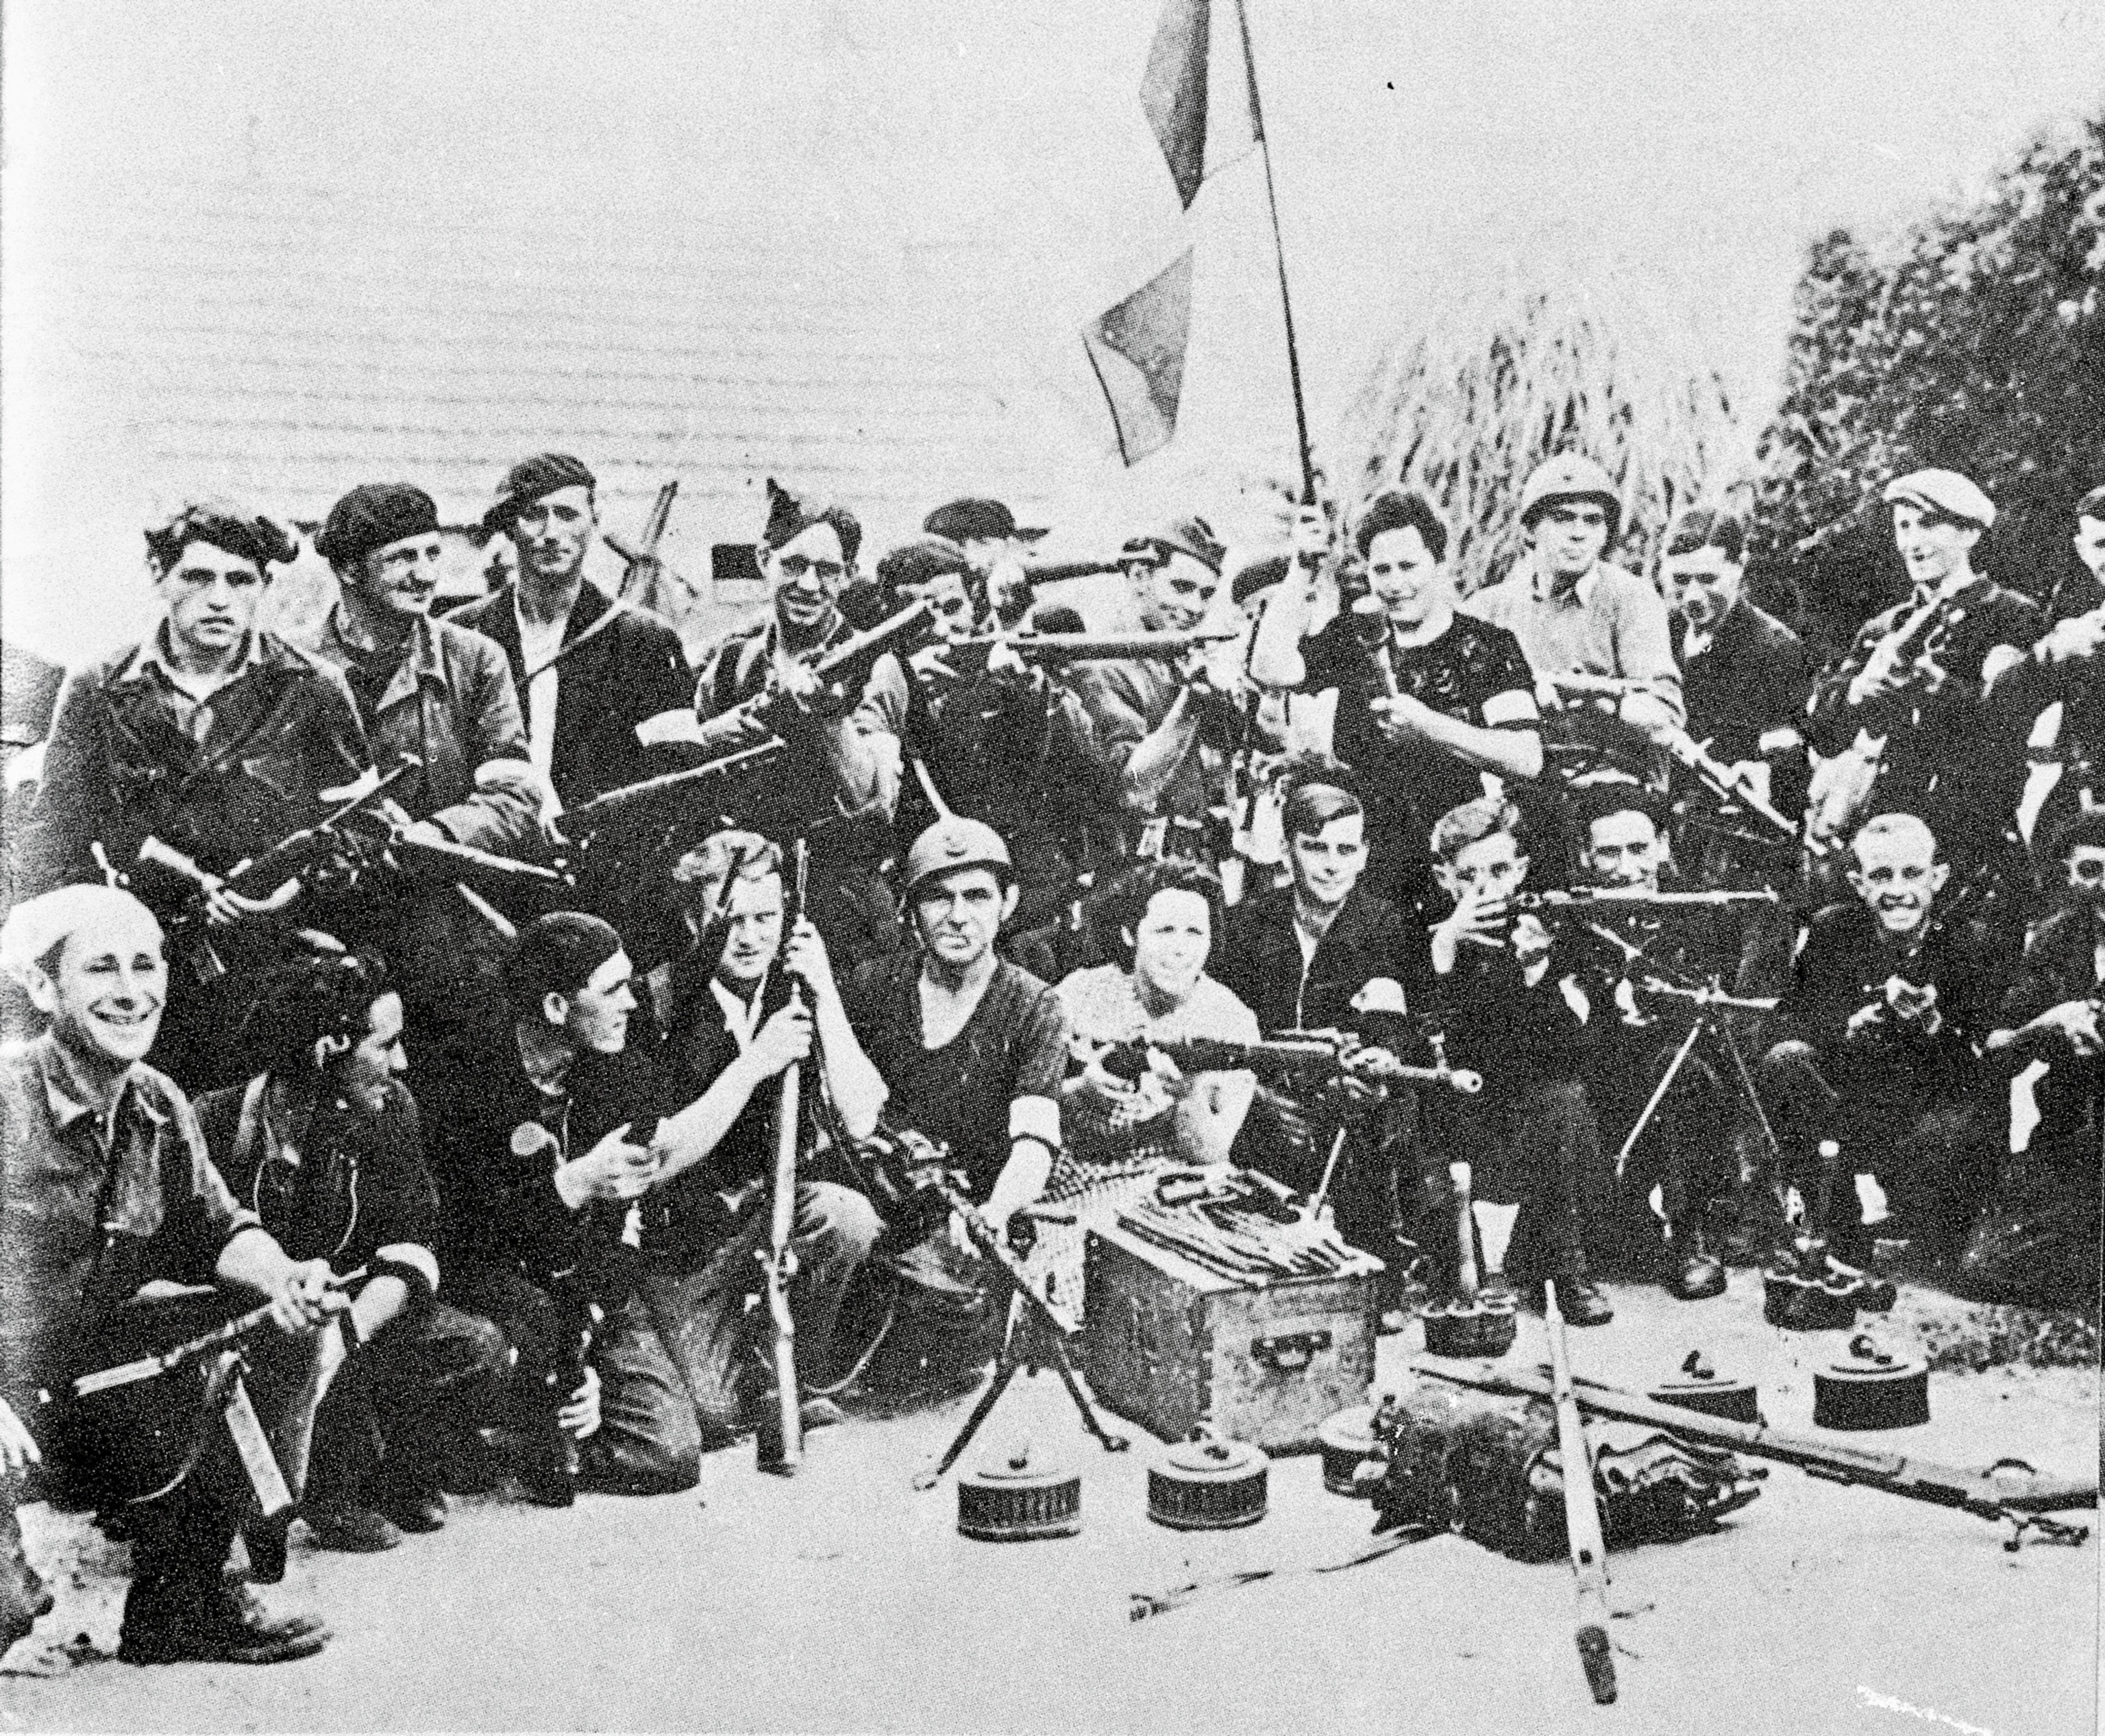 French Resistance fighters known as the maquis pictured near Paris in August 1944